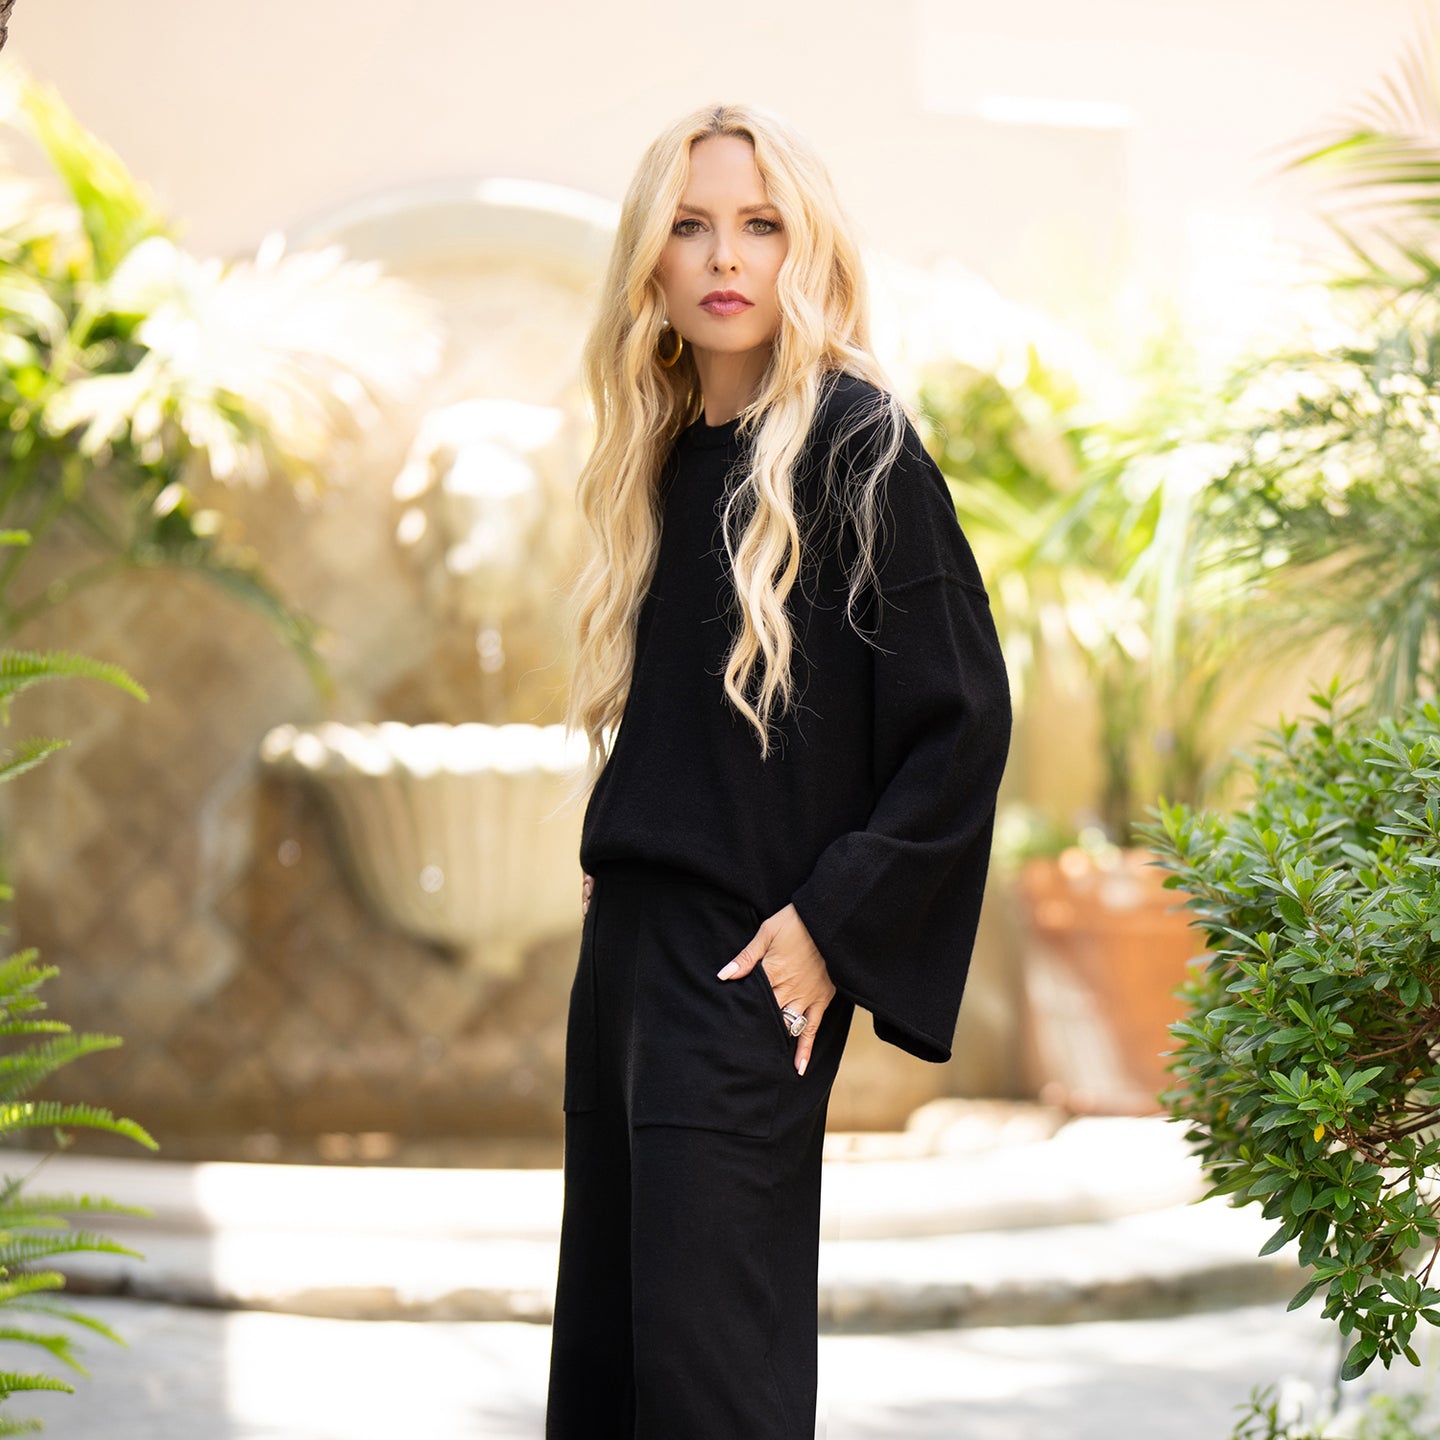 Rachel Zoe supports Jockey with new must-haves